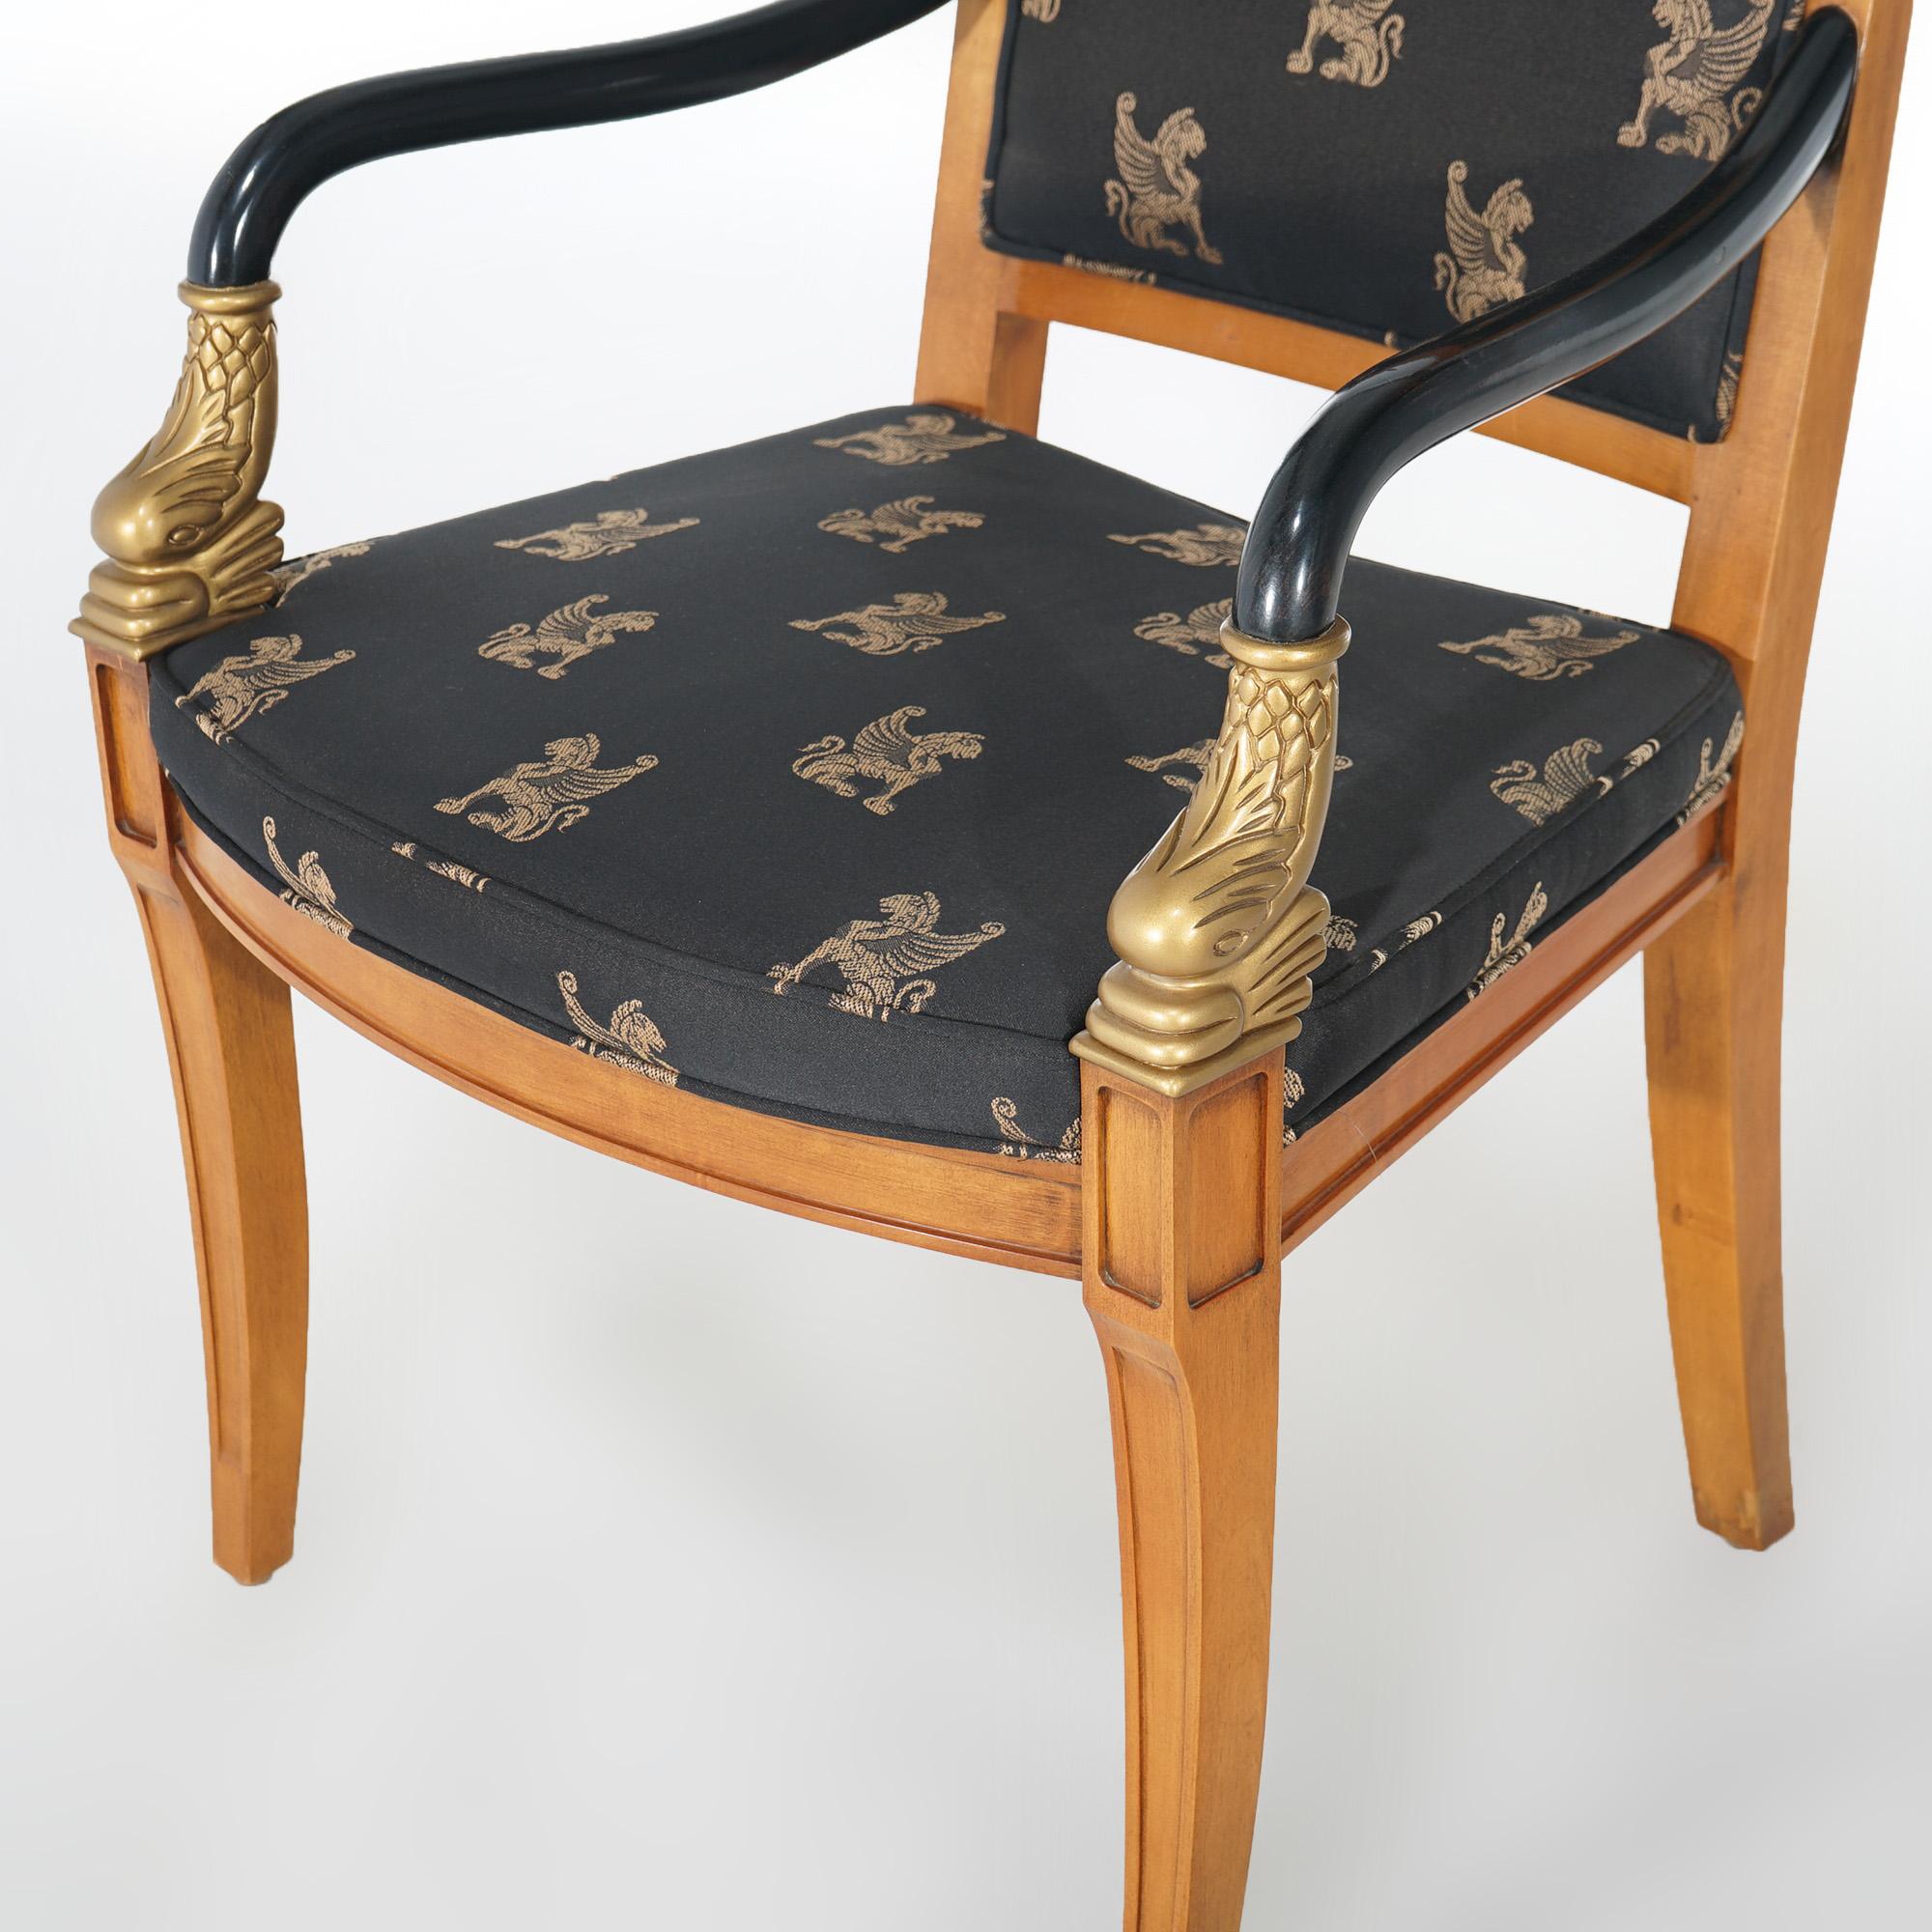 French Empire Figural Ebonized Giltwood Armchair with Dolphins by Century 20thC For Sale 1